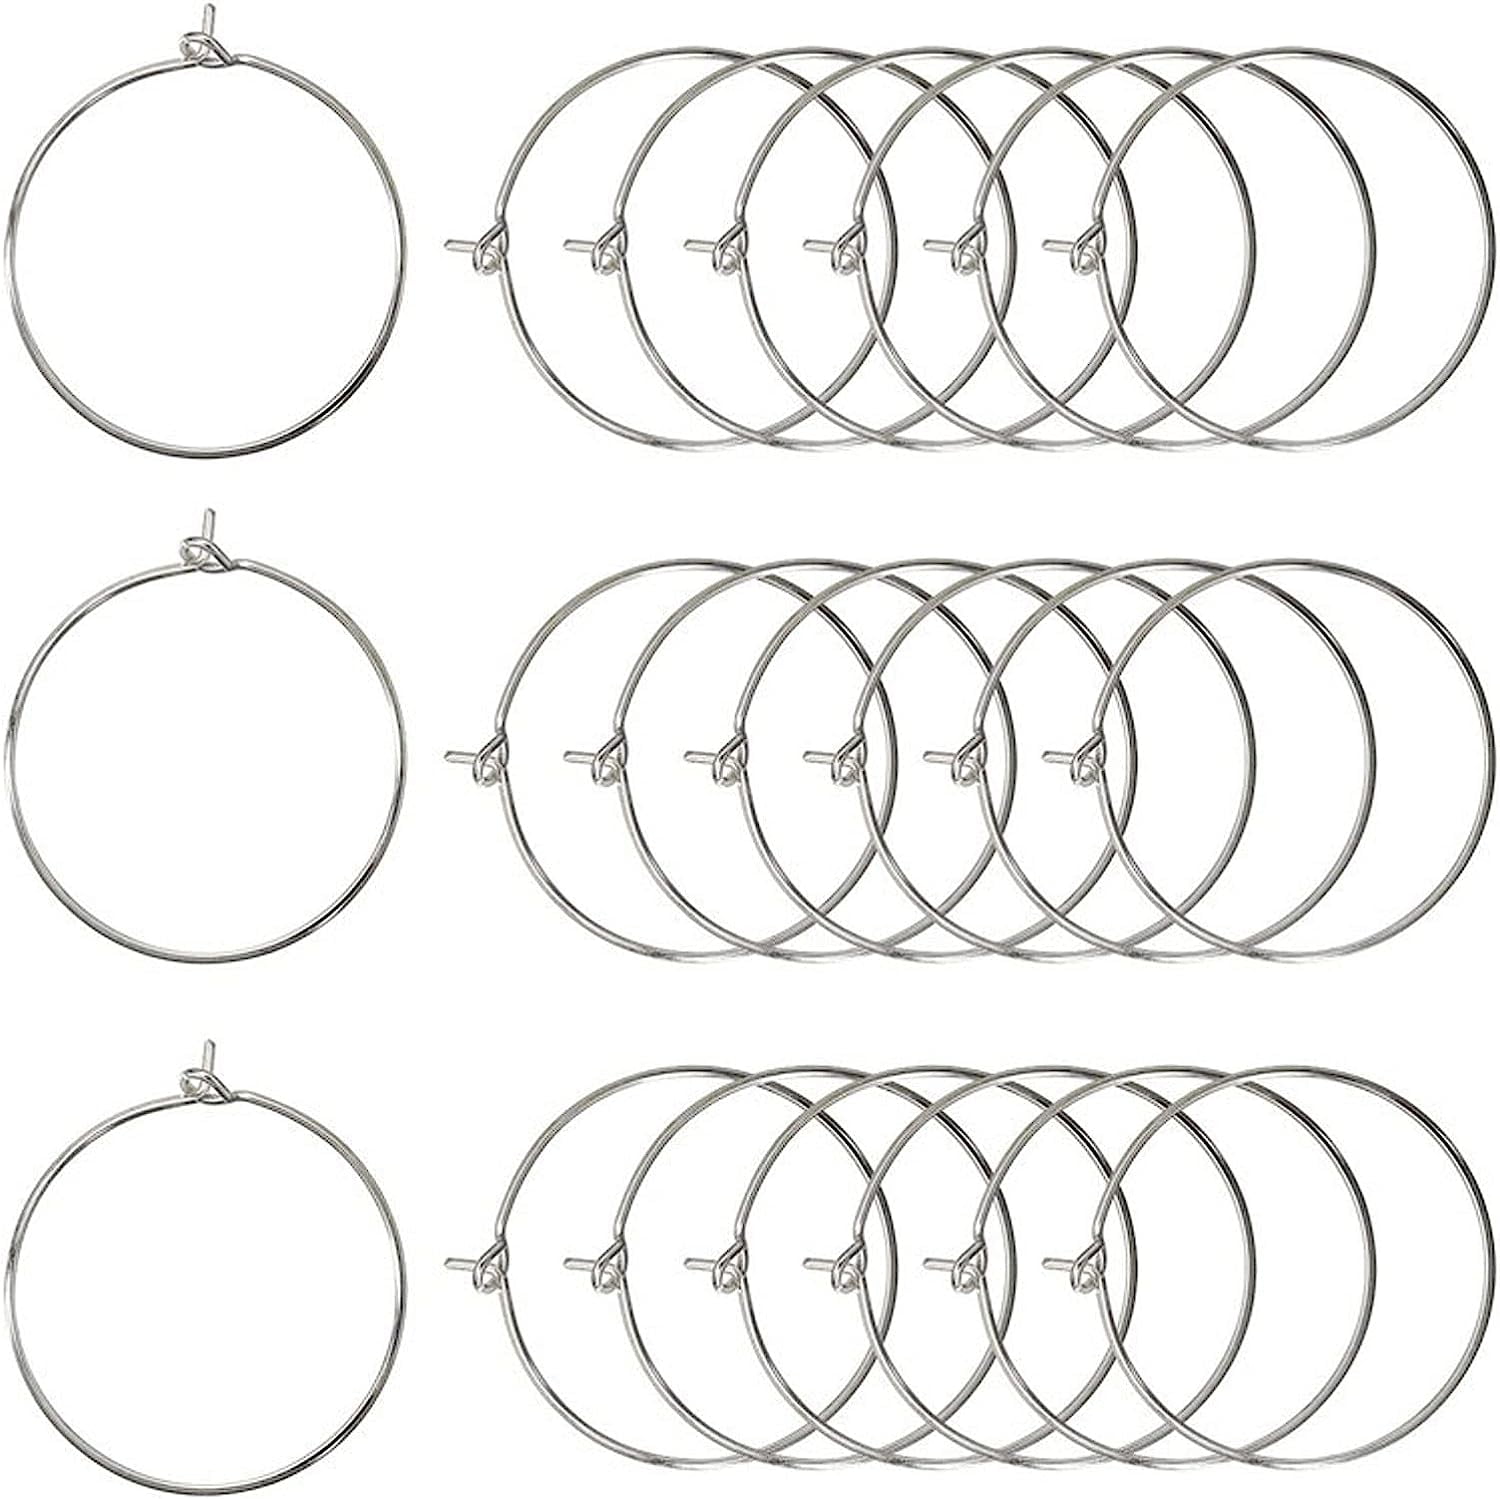  XKCWXY 755Pcs Beading Hoop Earrings for Jewelry Making,with  Earring Finding Teardrop Round Beading Hoop,Earring Hooks and Backs,Jump  Rings, Silver Earring Charms,Pony Beads for Earring Making Kit